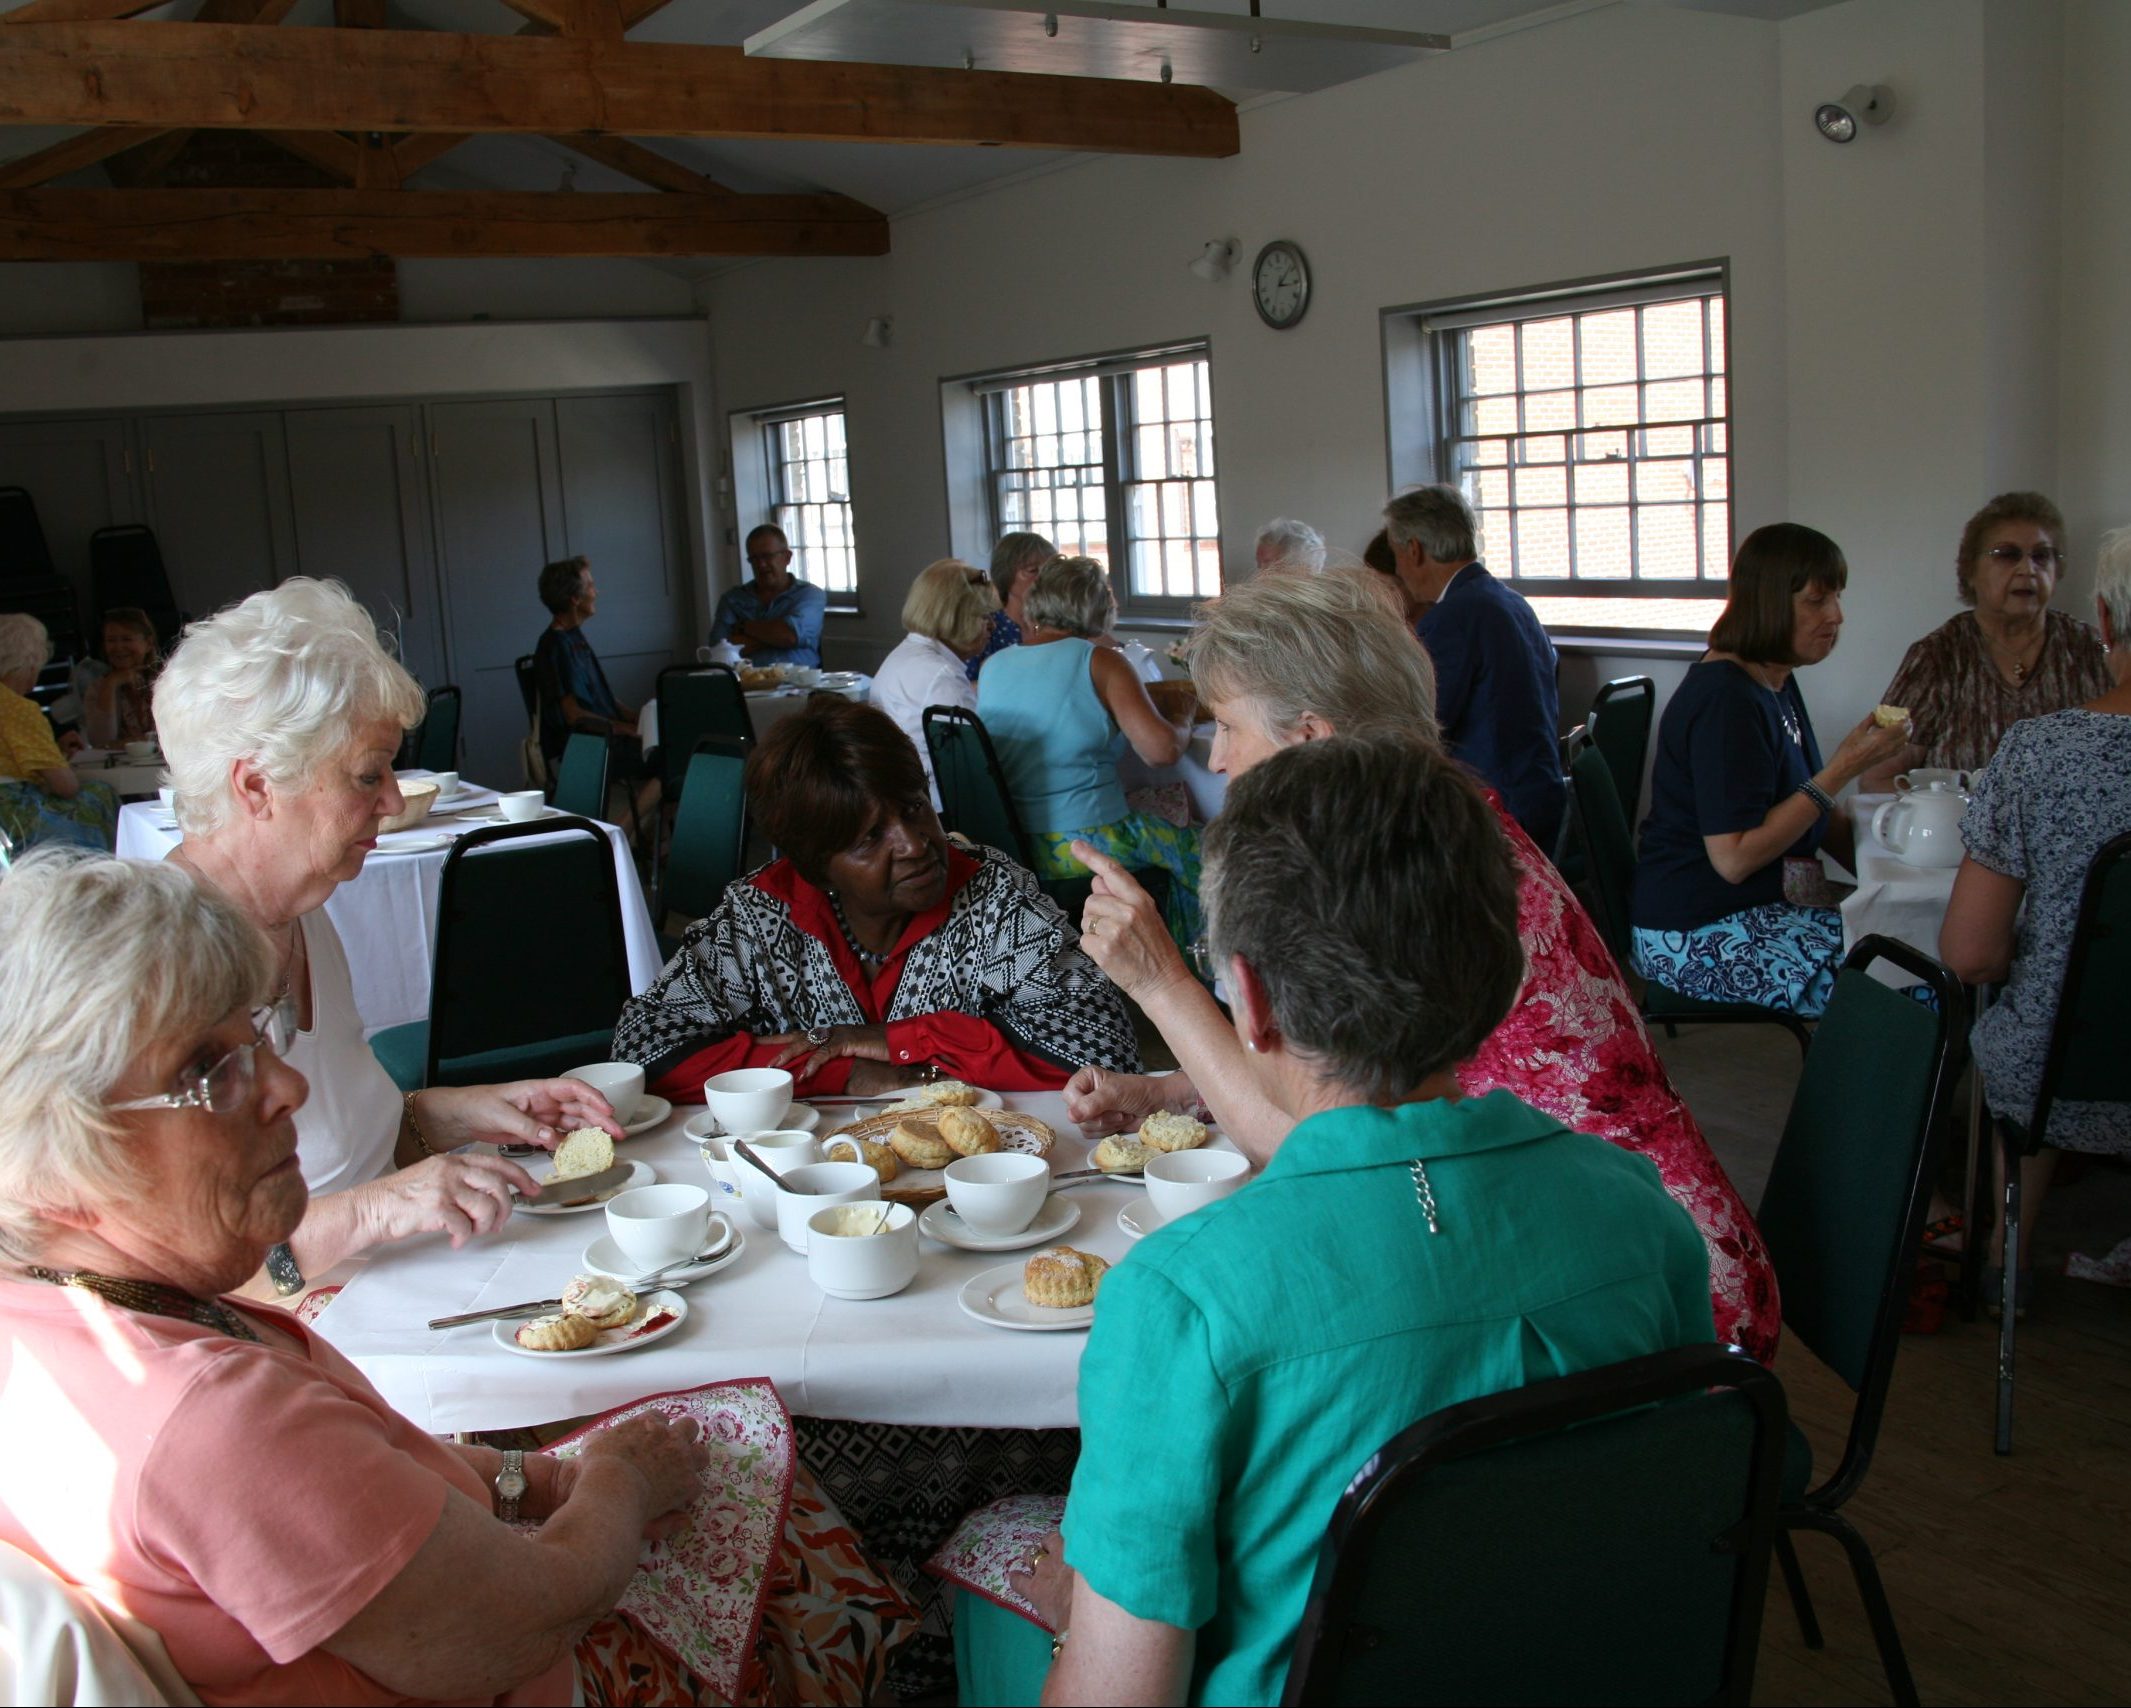 An image of a large group of people enjoying afternoon tea in the Hills Room for hire at Gainsborough's House.